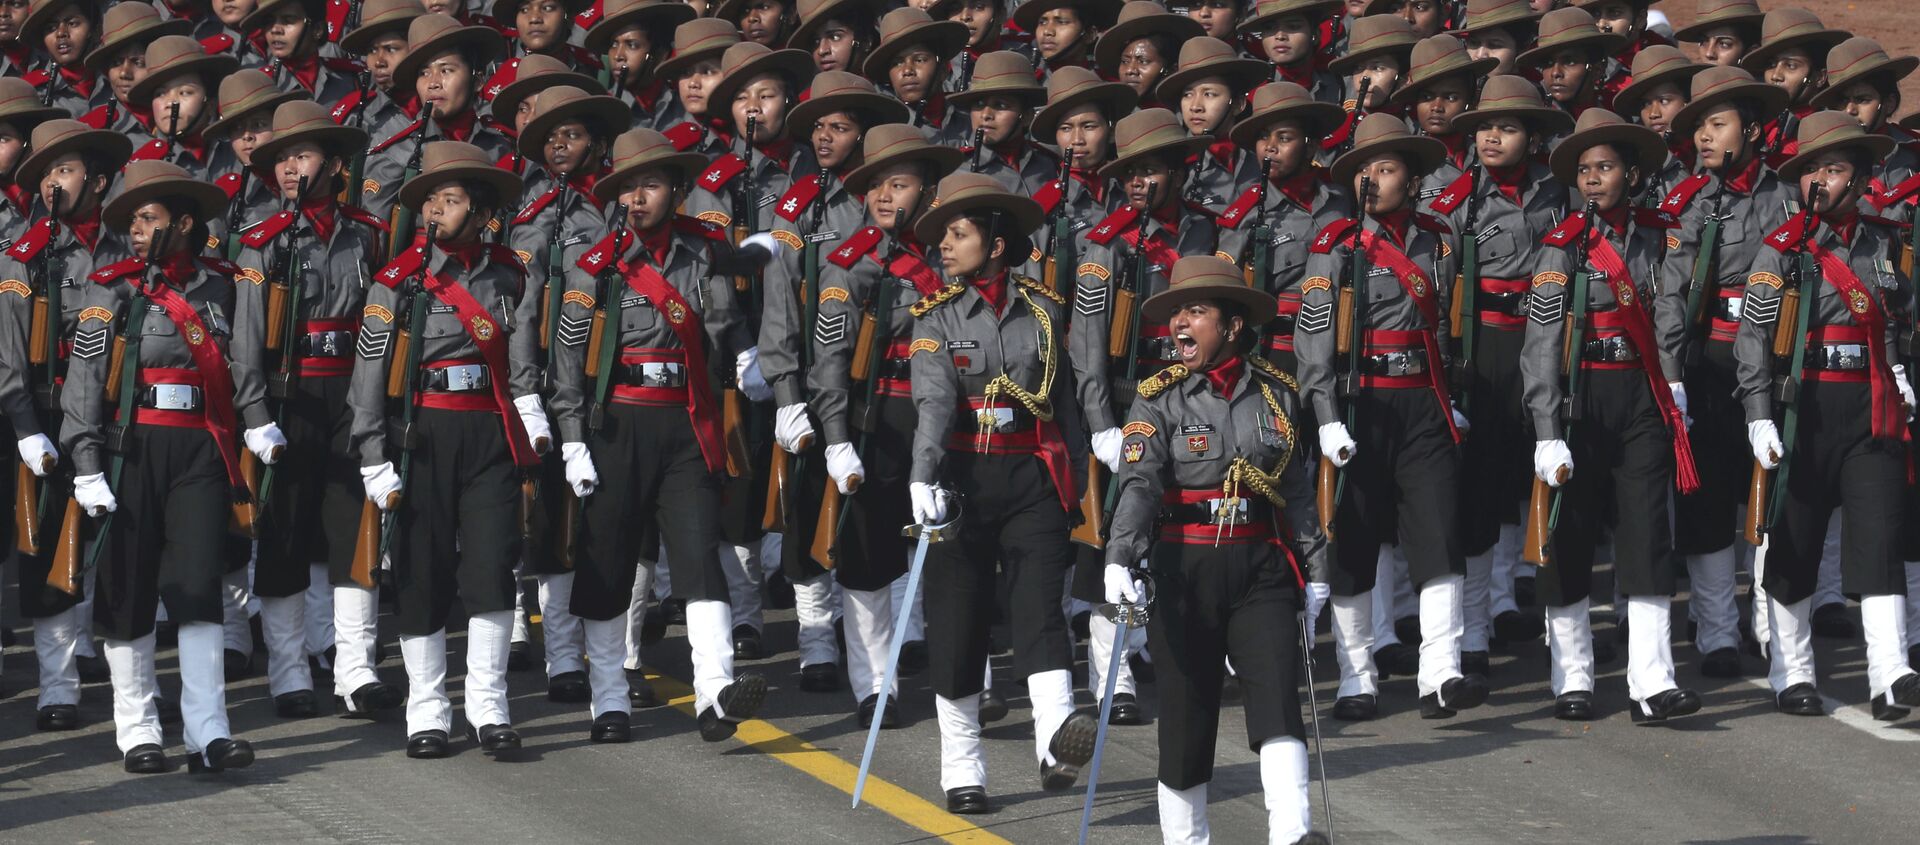 A women's contingent of the paramilitary Assam Rifles participate for the first time at the Republic Day parade in New Delhi, India, Saturday, Jan. 26, 2019 - Sputnik International, 1920, 17.02.2020